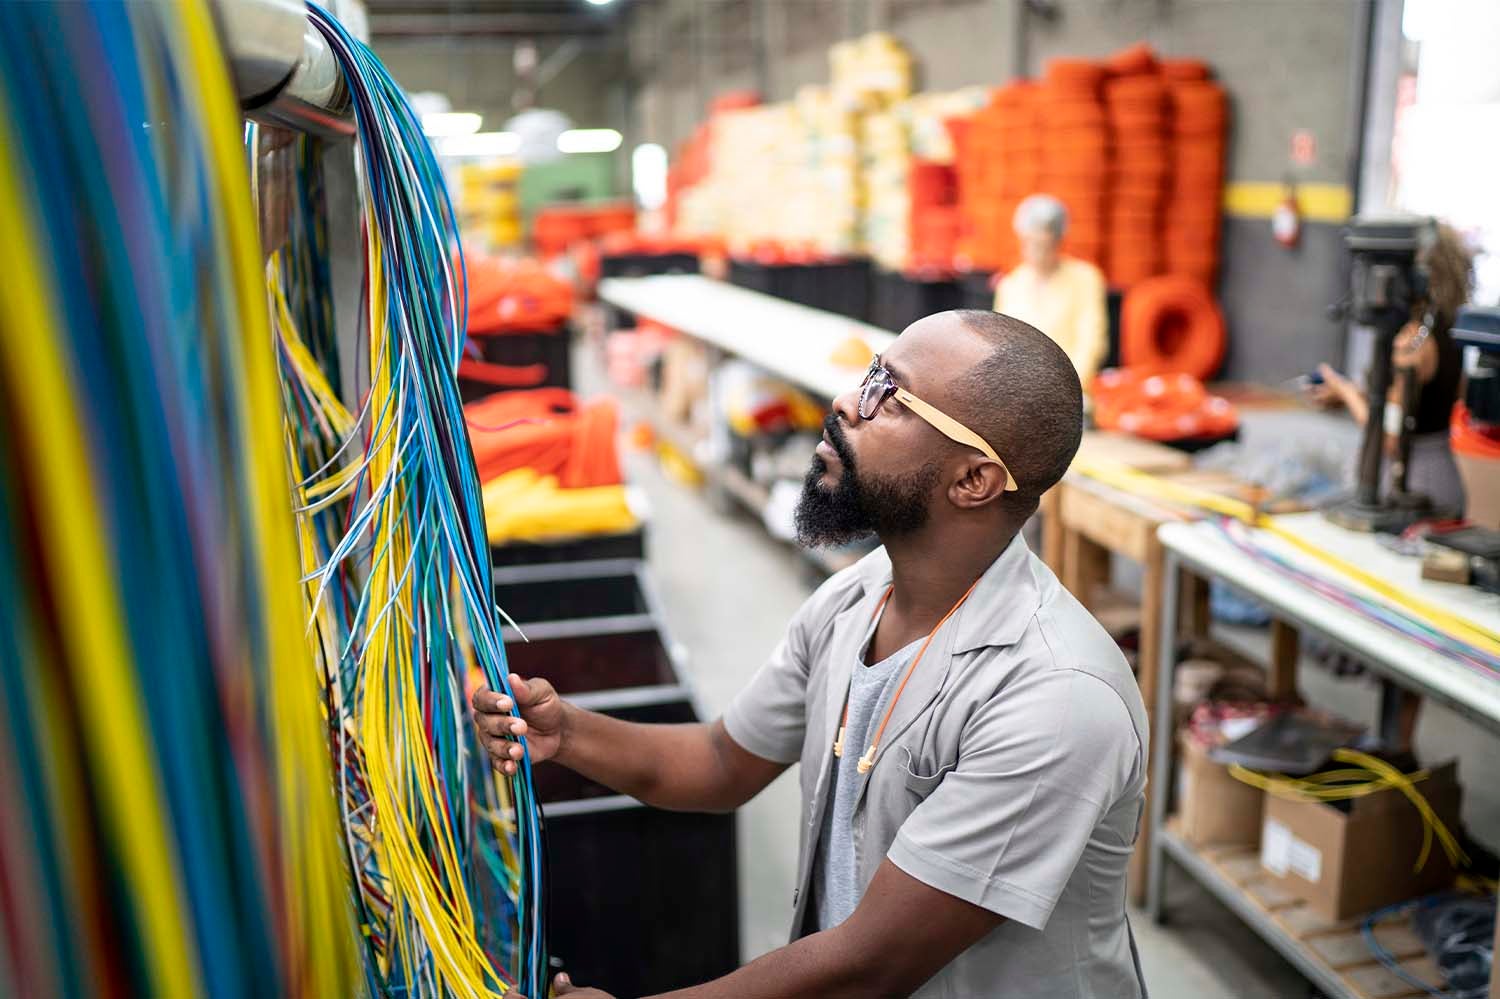 Electrical employee examining wires in factory setting